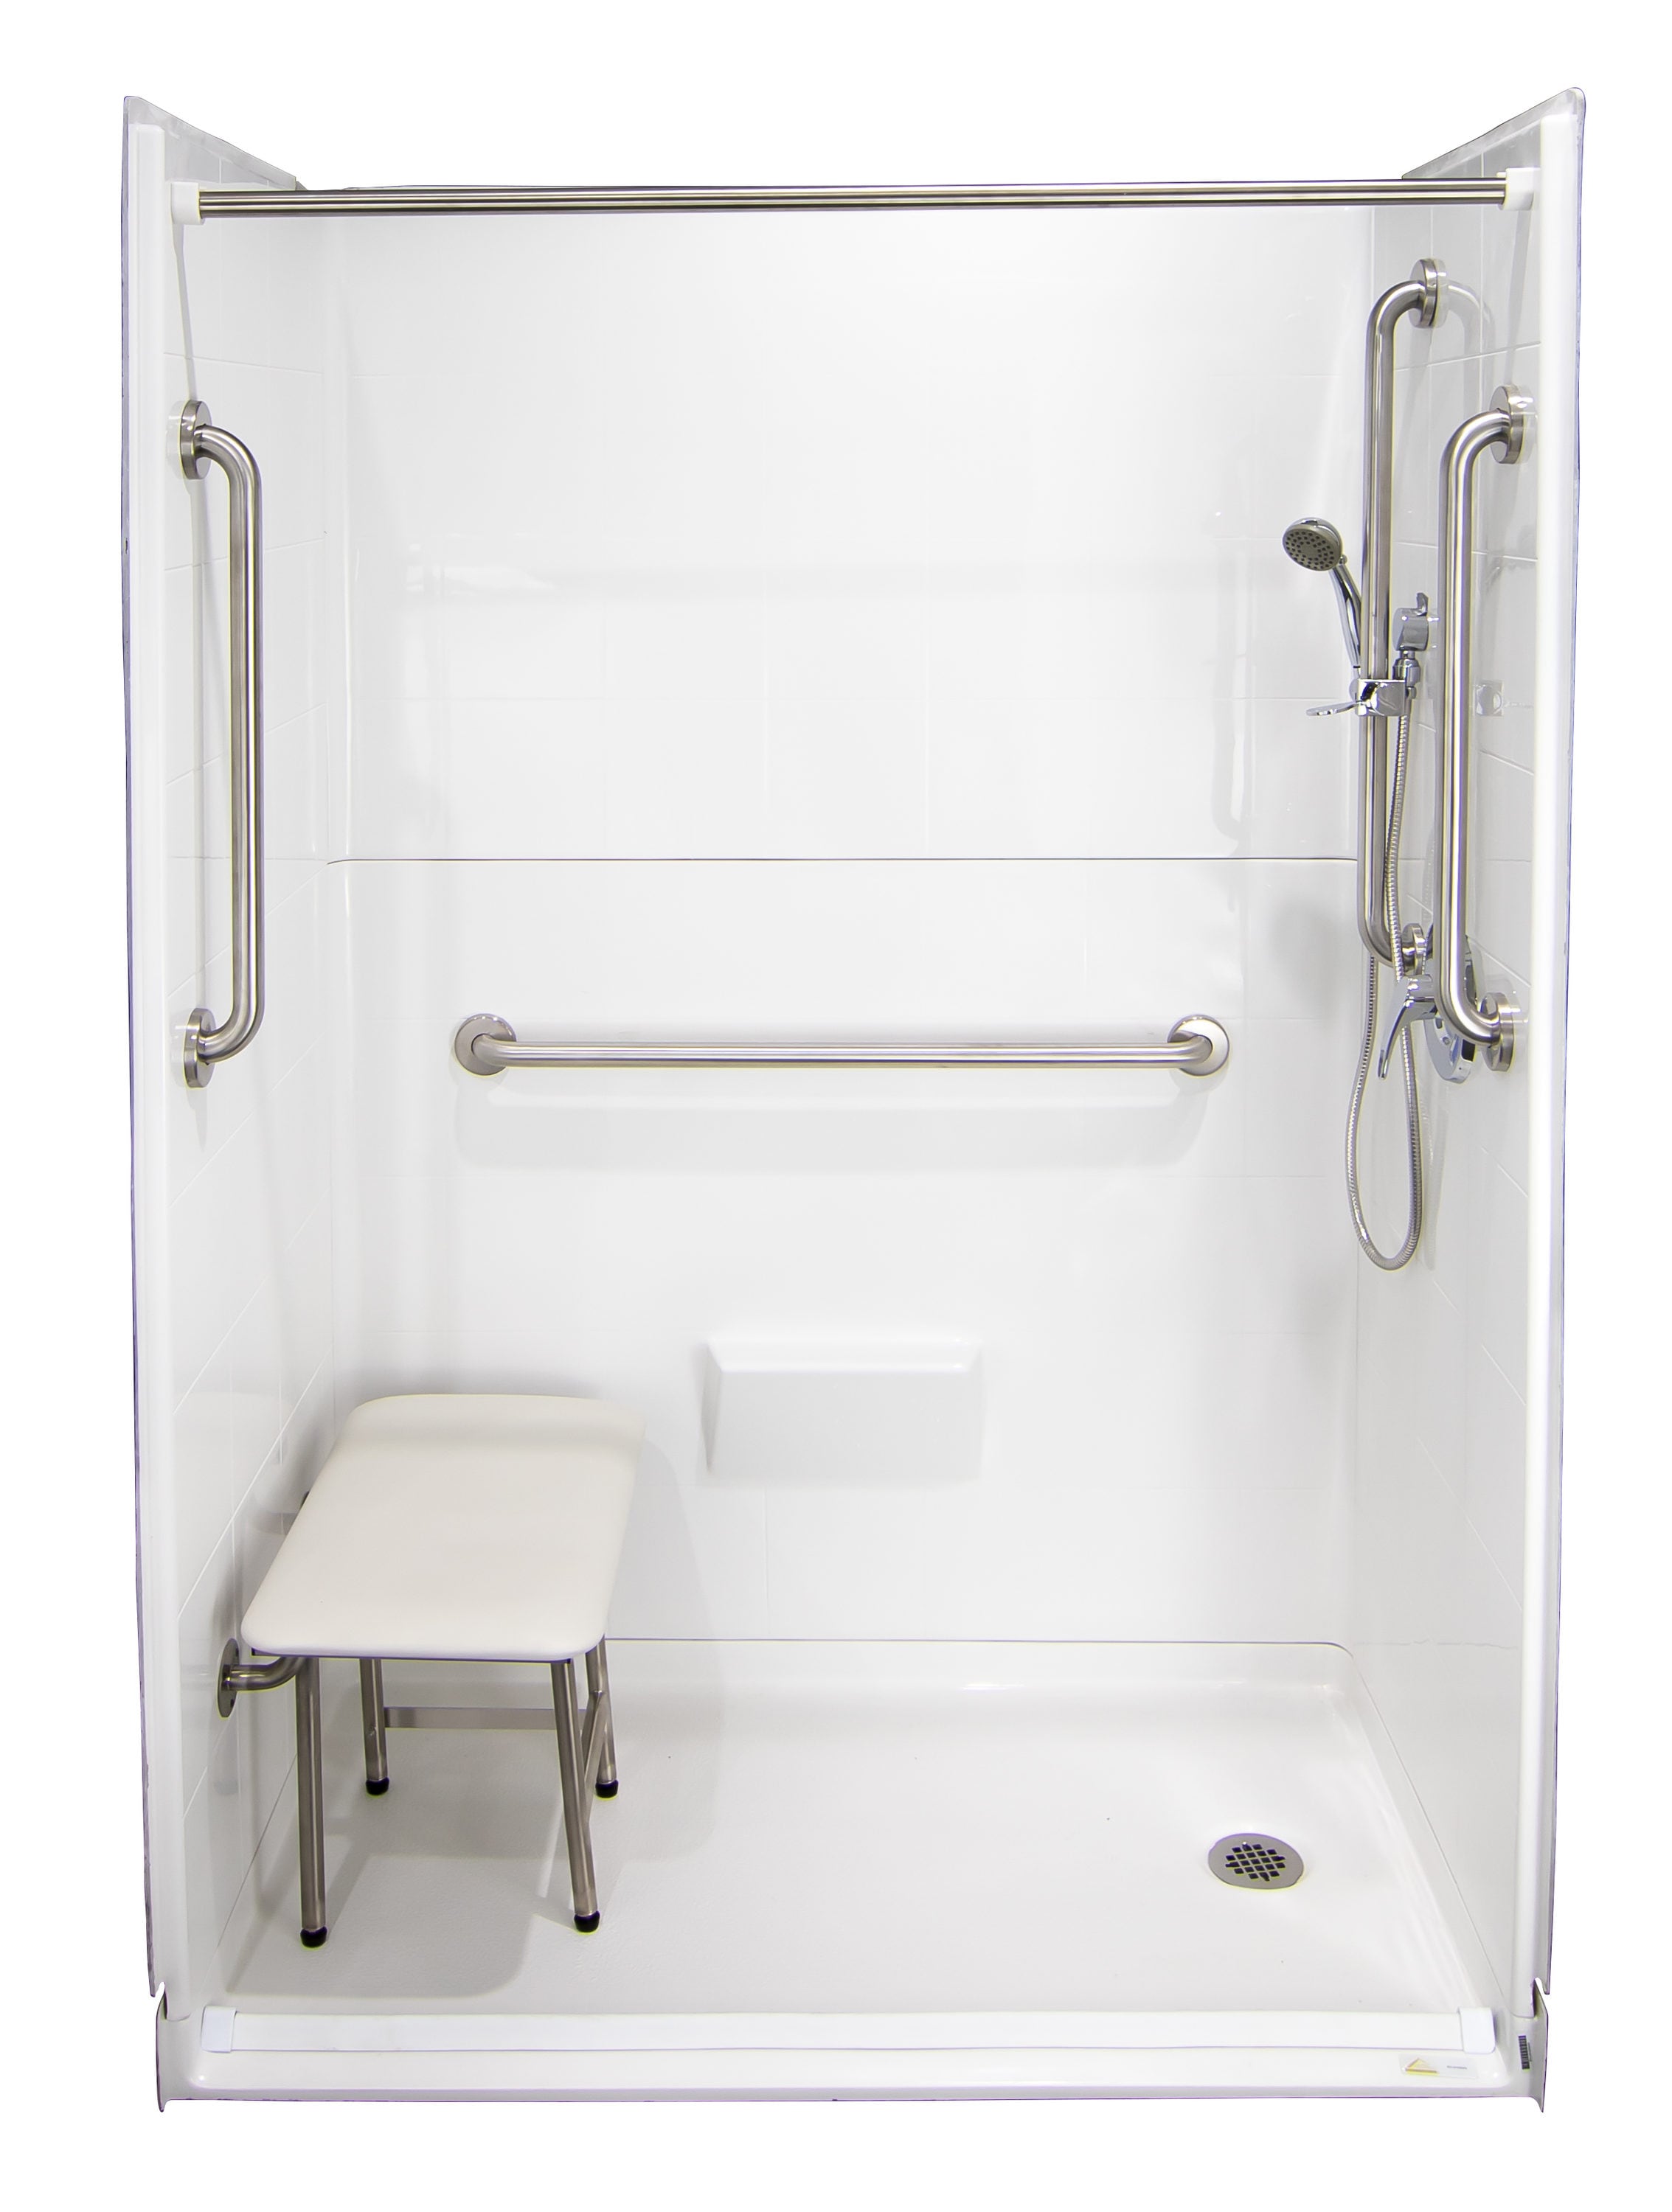 Laurel Mountain Whitwell ADA Roll-In Zero Threshold- Barrier Free White 33-in x 62-in x 78-in Base/Wall One-Piece Shower Kit with Folding Seat